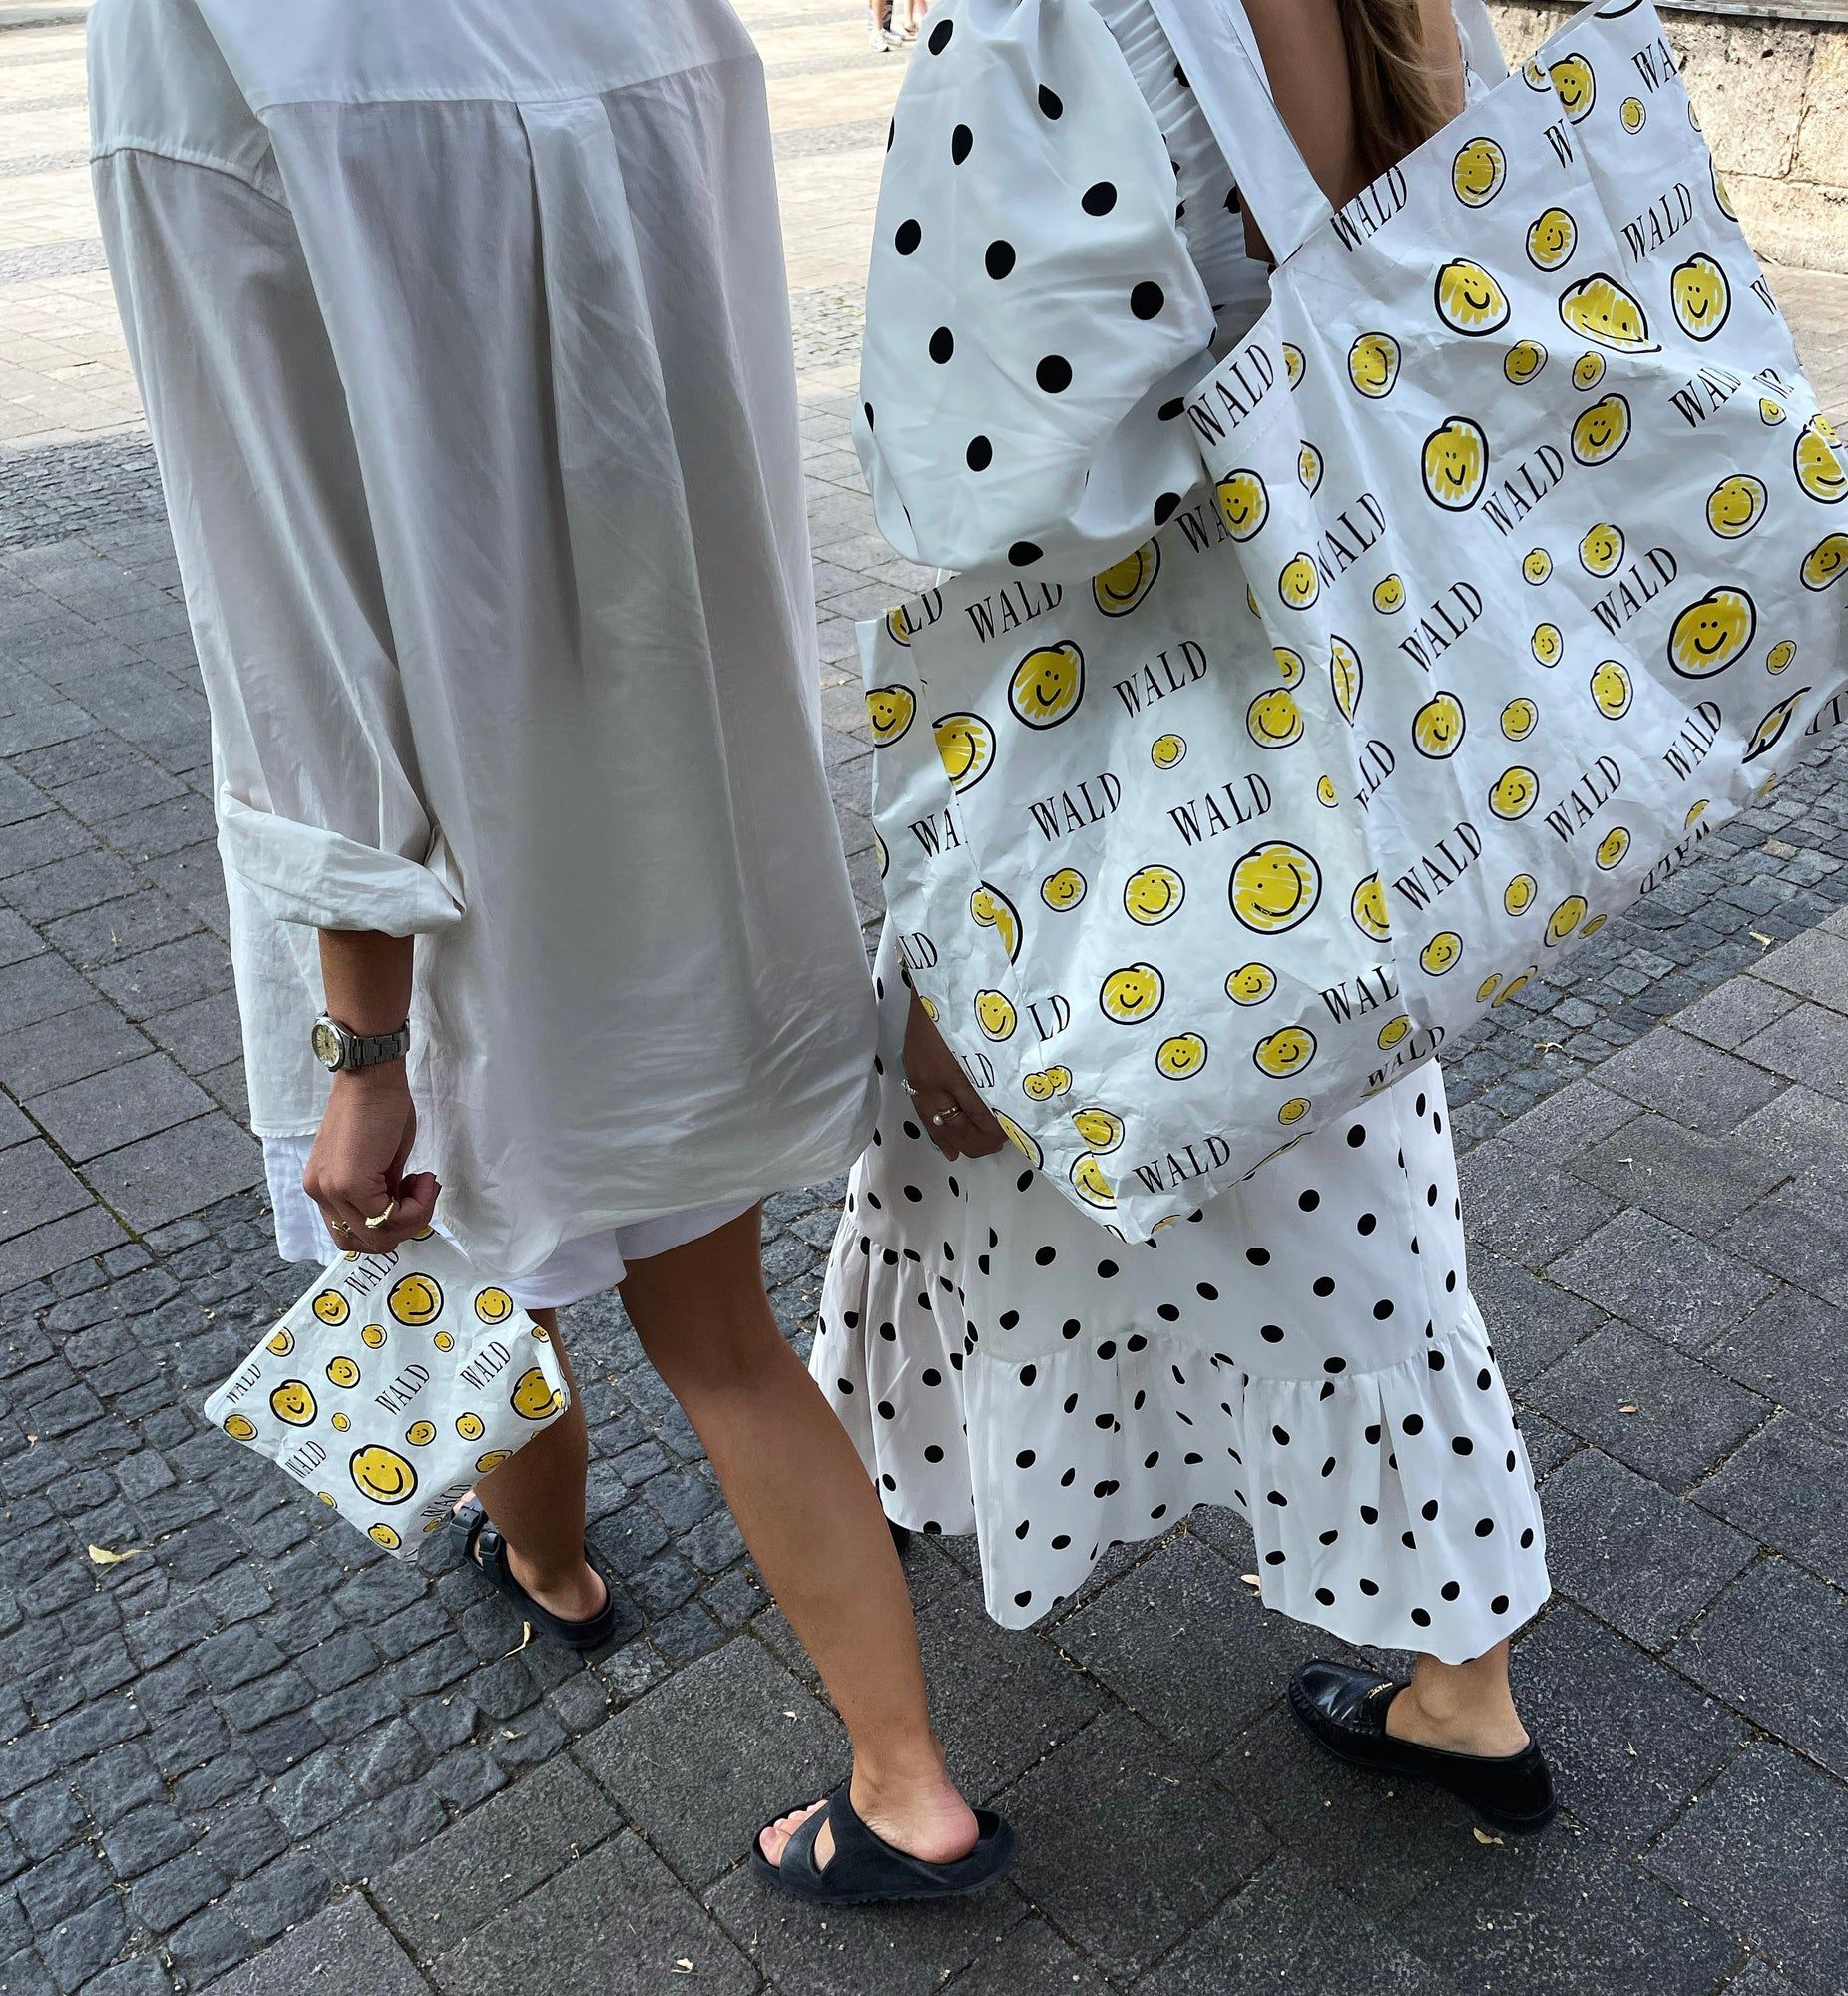 Two Berlin women flaunting jewelry while walking down the street with WALD Berlin Smilie Dude Shopper bags.